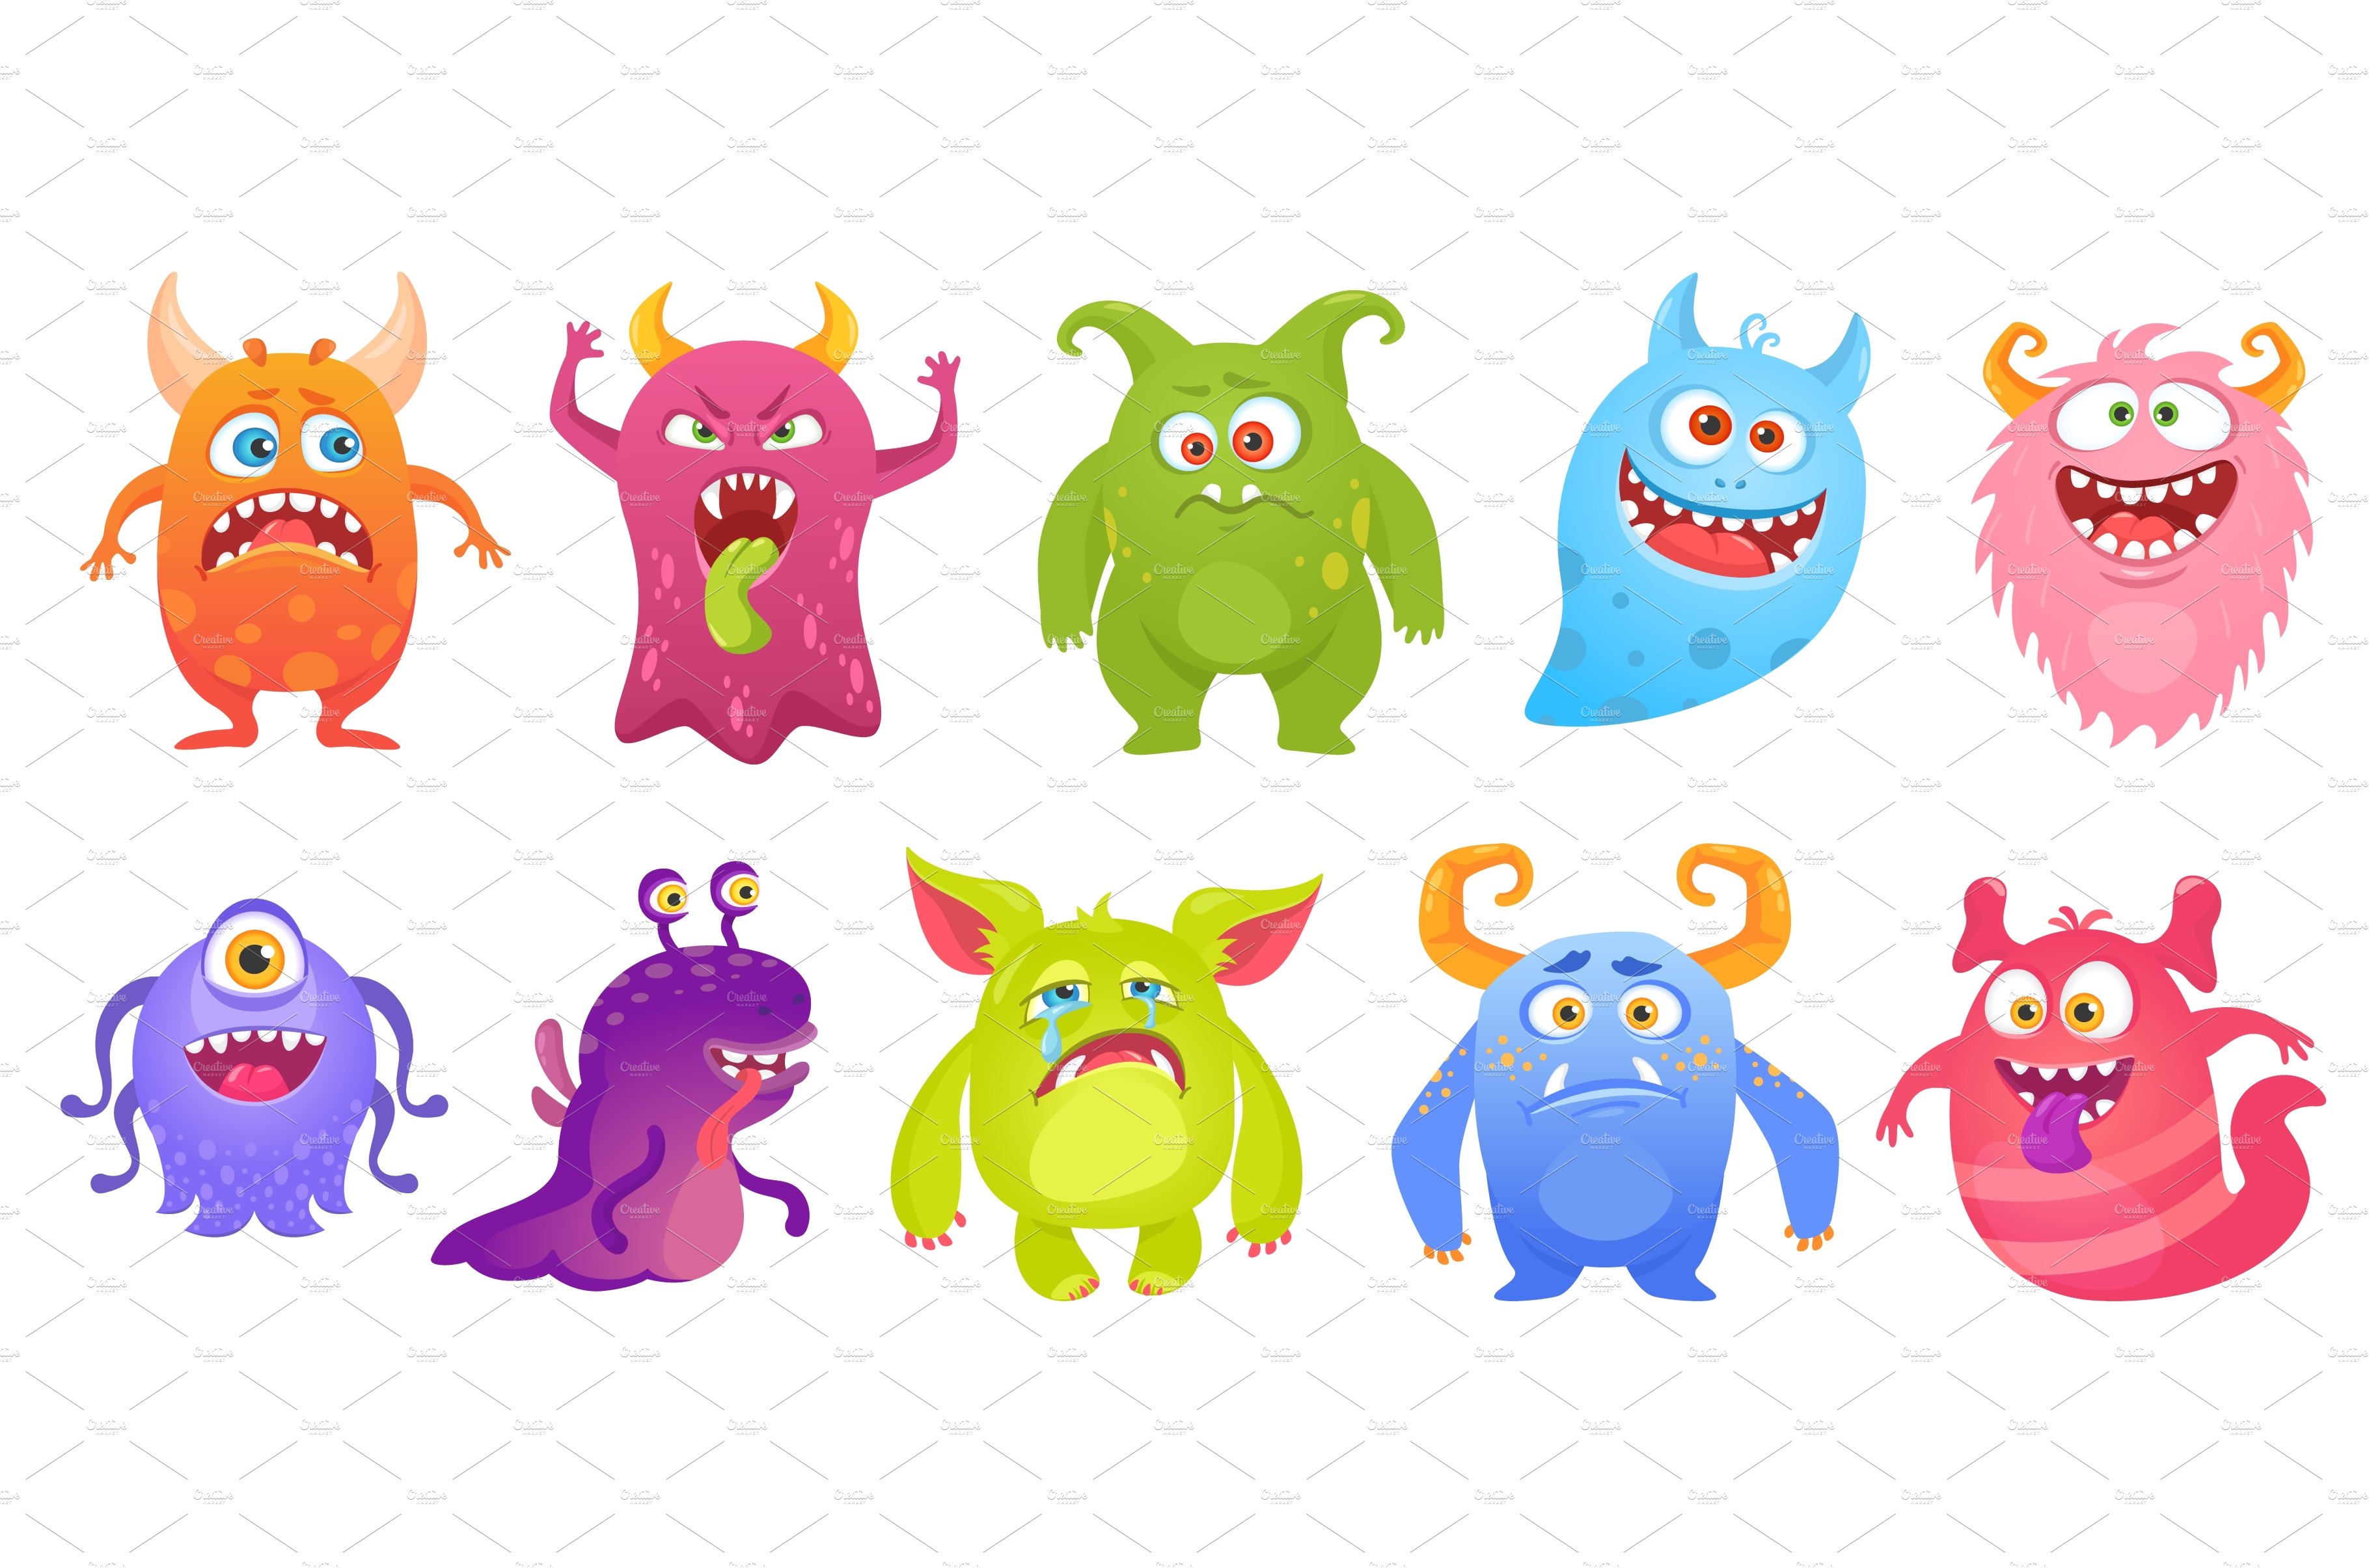 Cute monster characters smiling cover image.